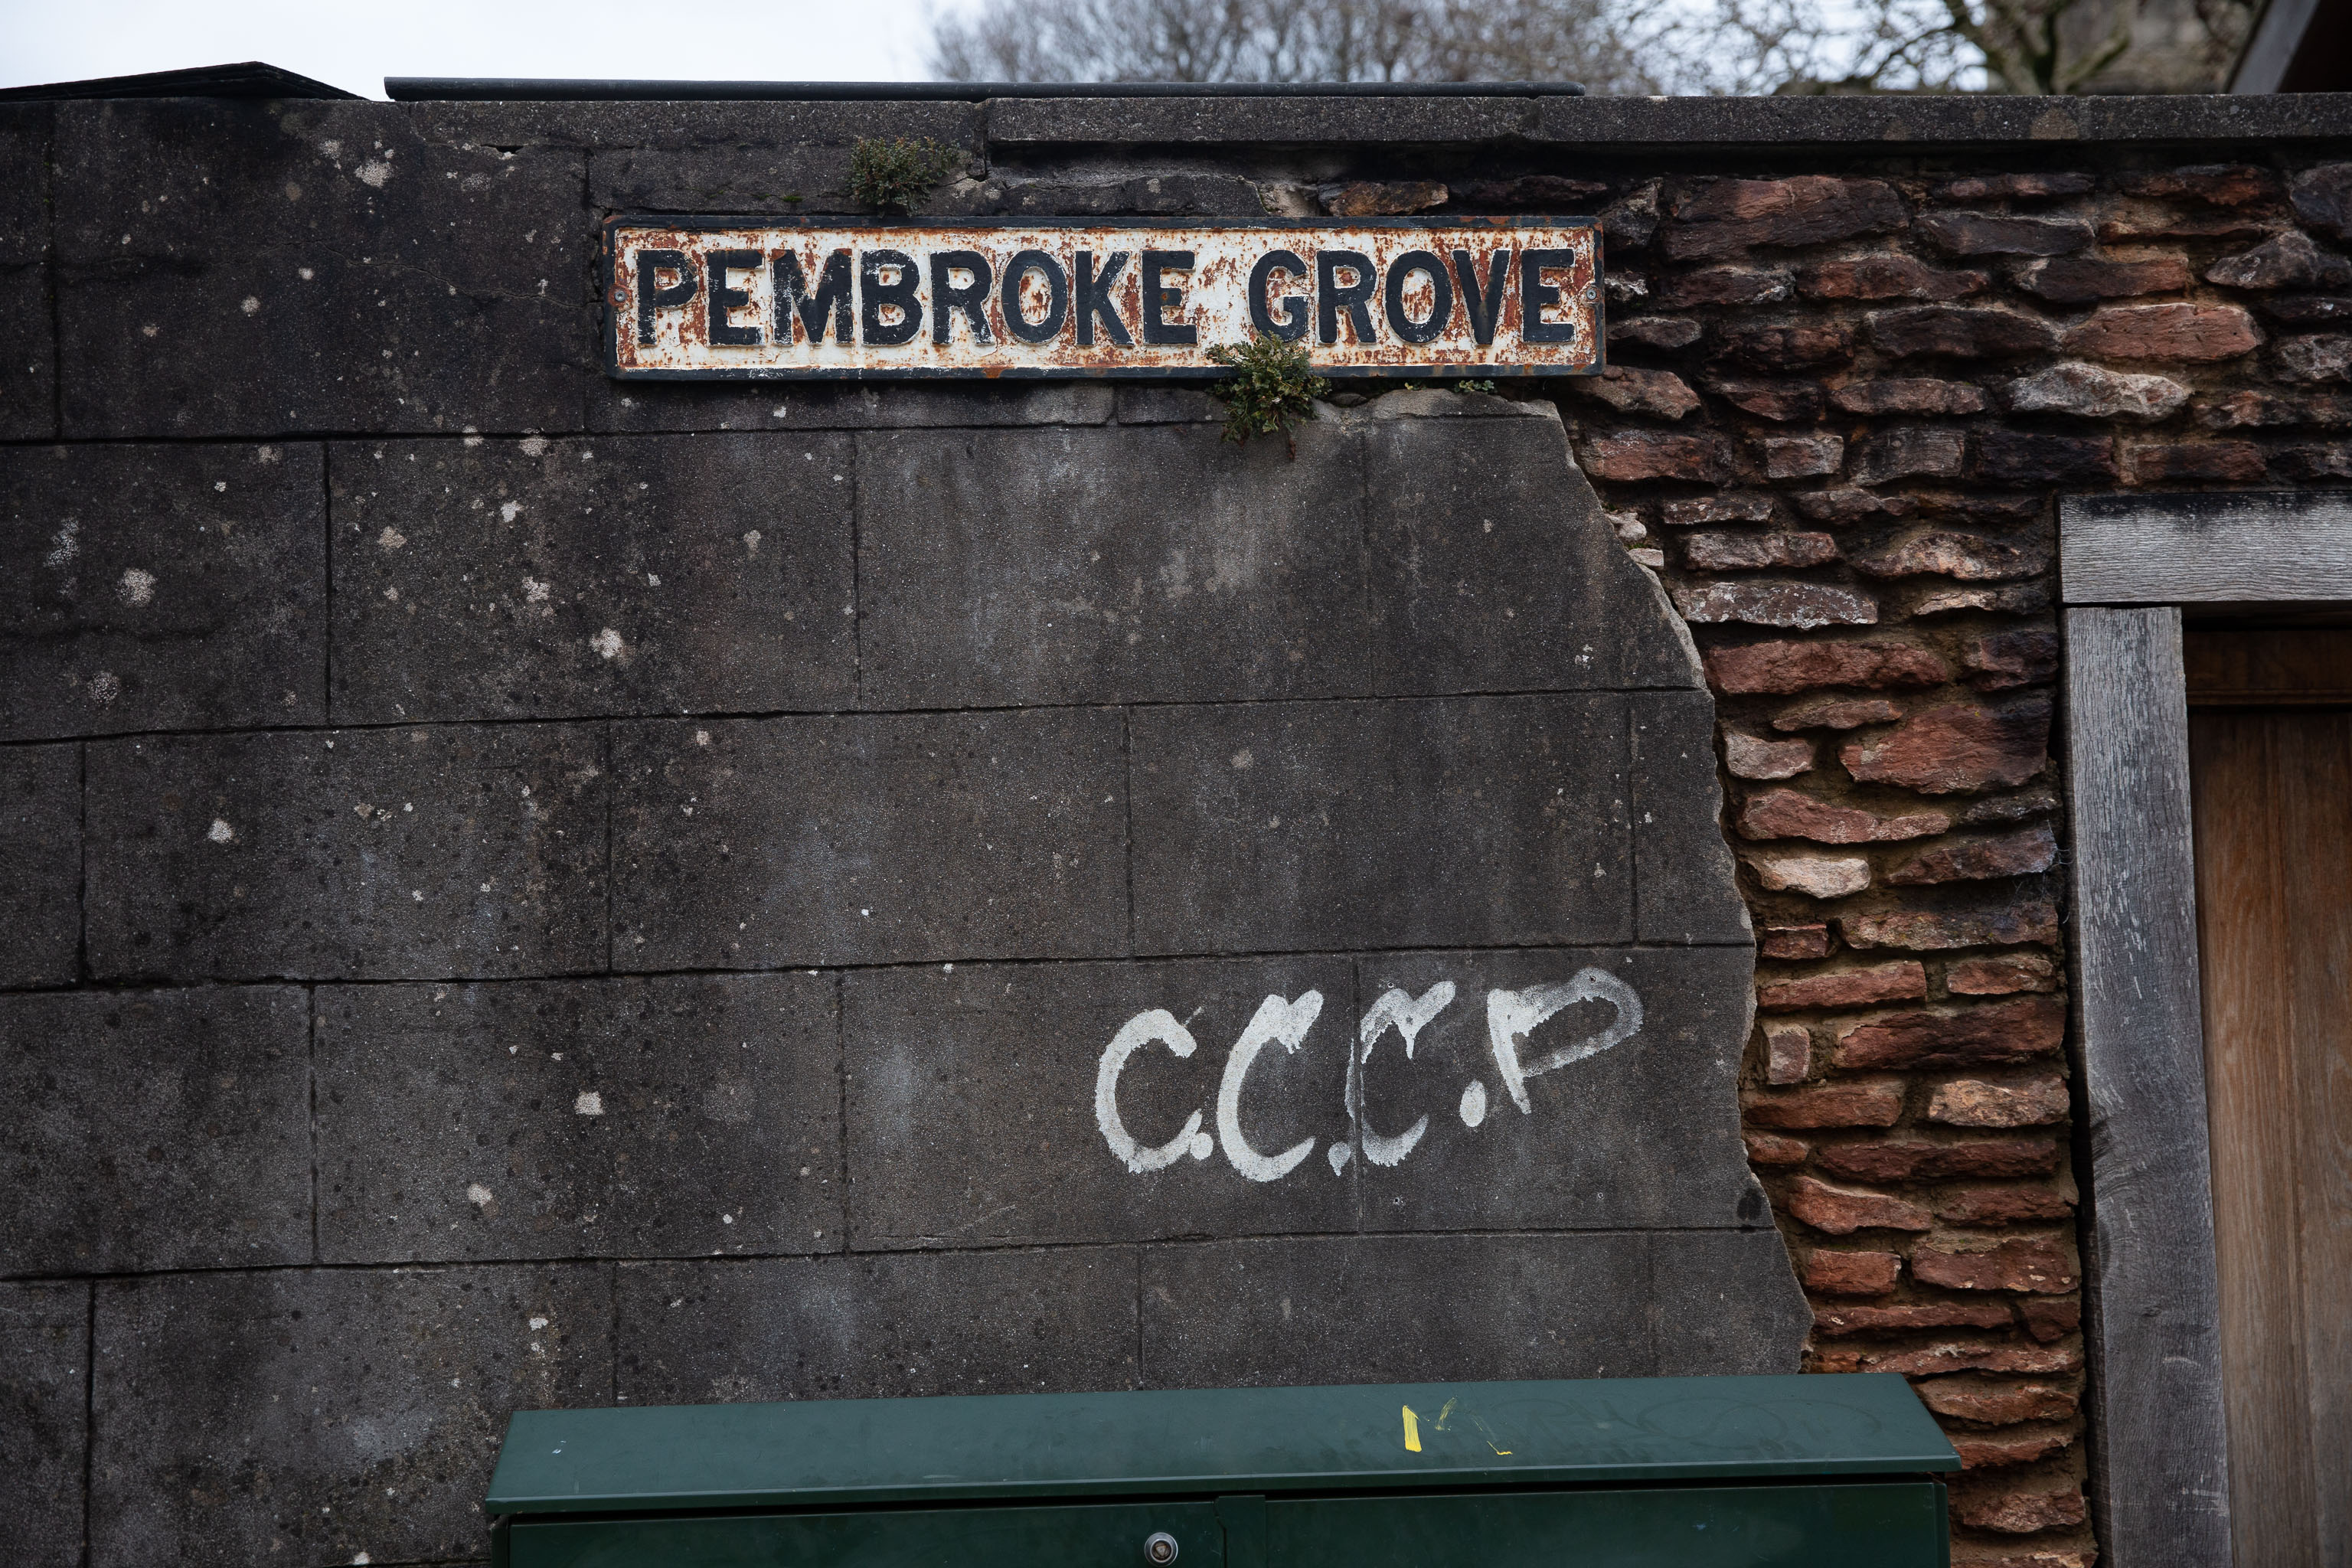 Pembroke Grove
You woudln't think there'd be much CCCP-related actvity in Clifton.
